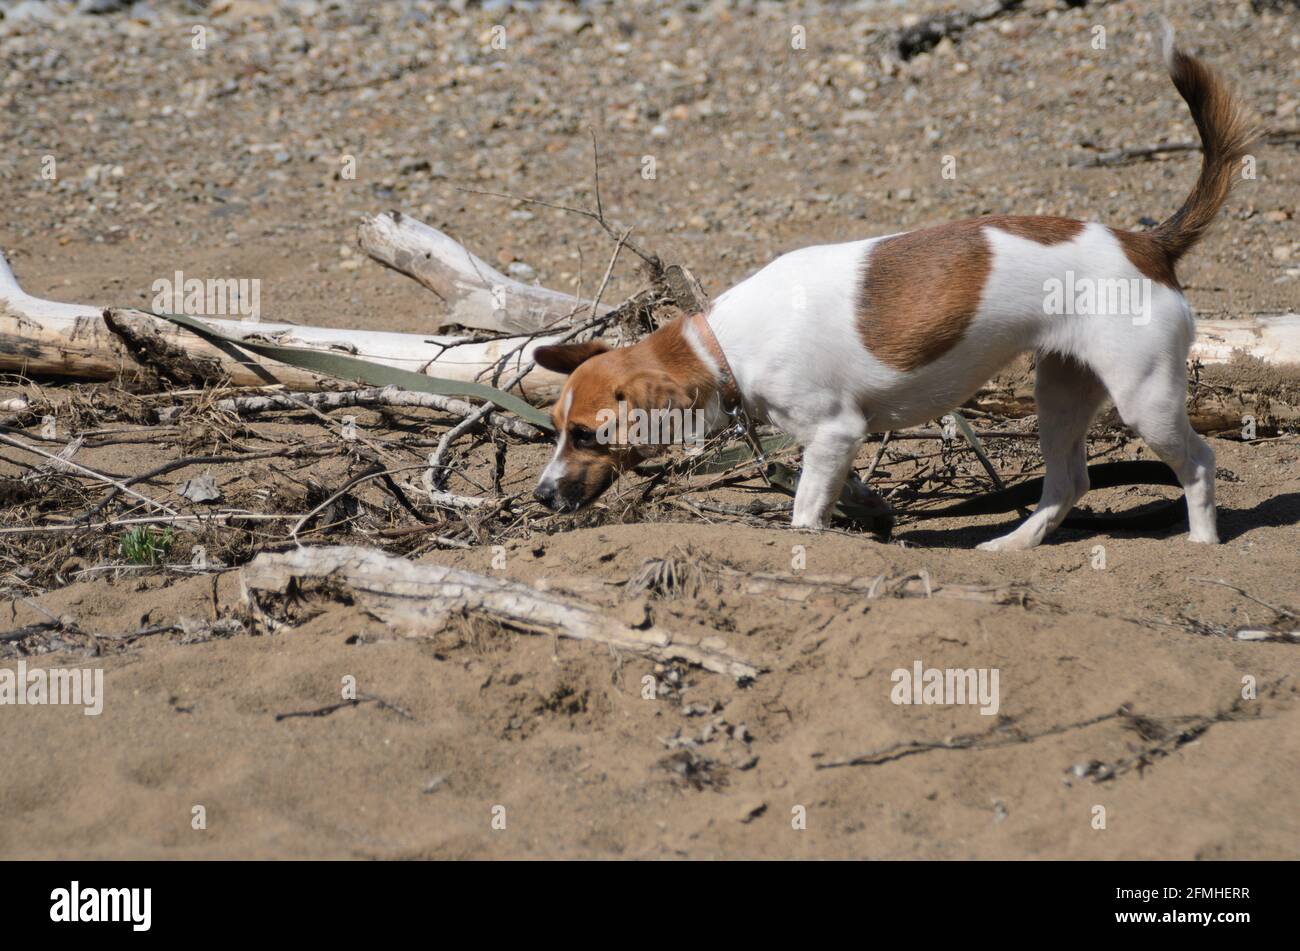 A white dog with brown spots on a canvas leash sniffs at a wooden blockage partially covered with rocks and sand. Selective focus. Stock Photo